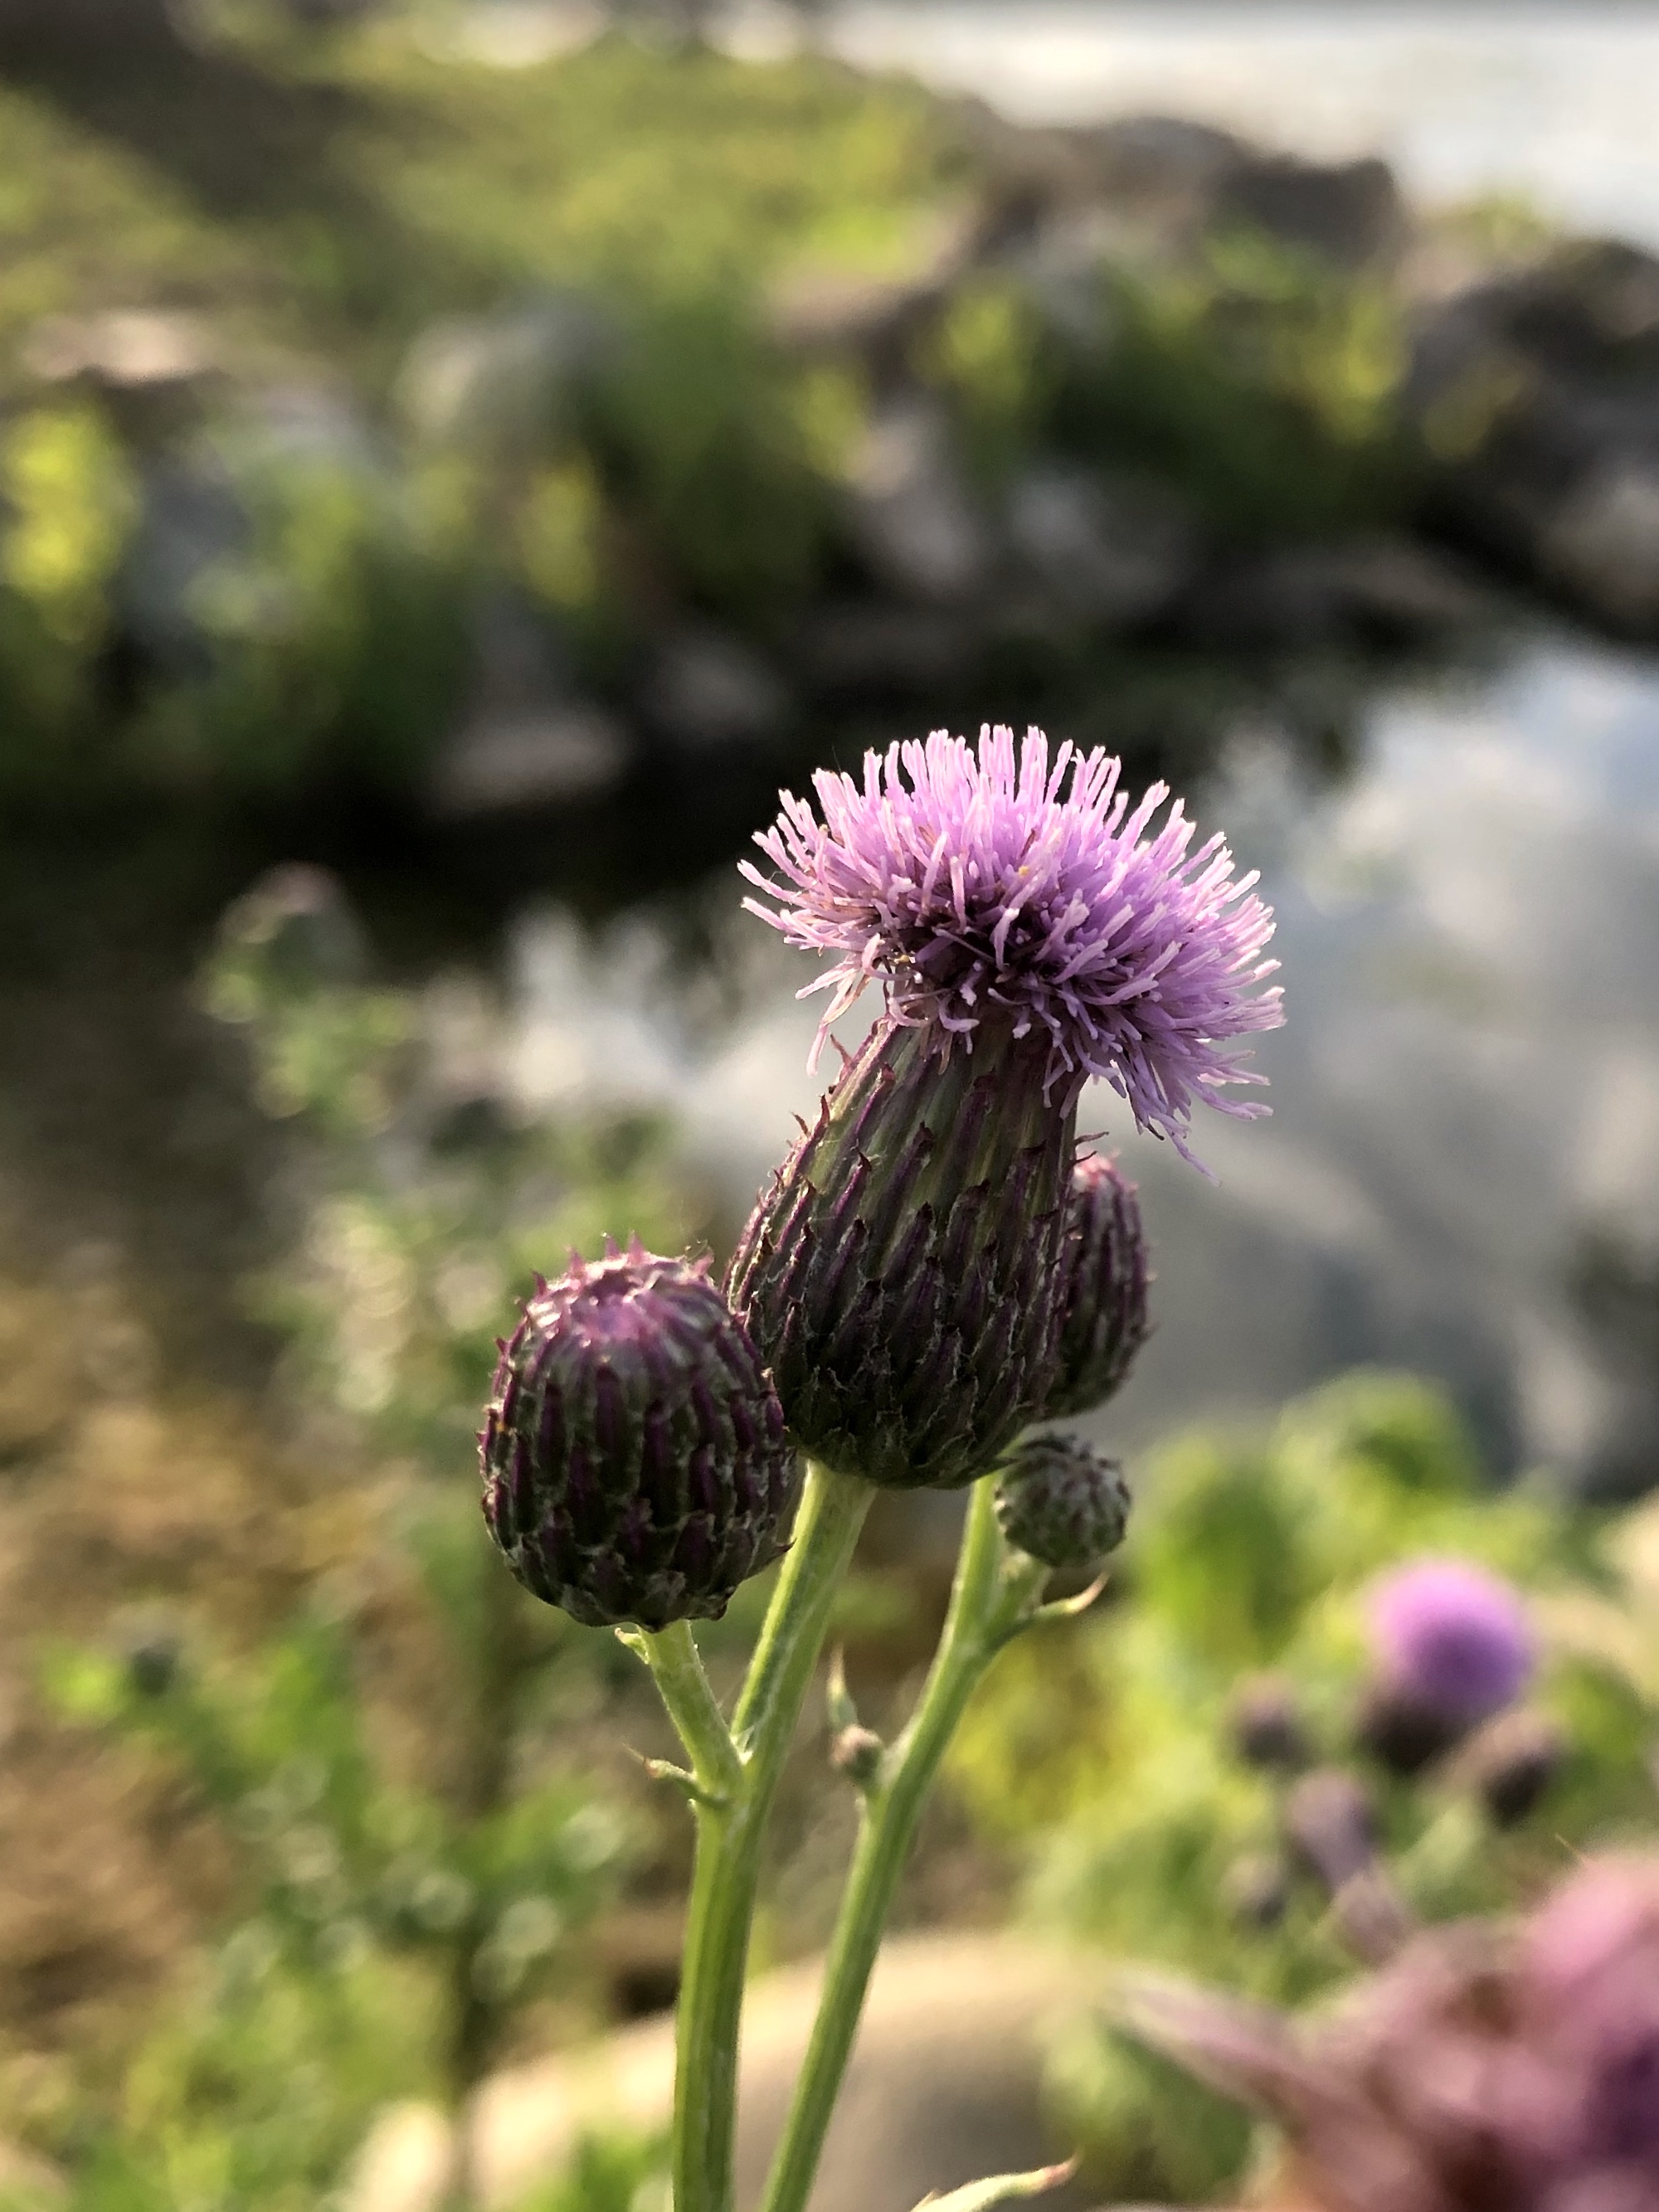 Canada Thistle on the shore of Lake Wingra in Wingra Park in Madison, Wisconsin on July 2, 2019.